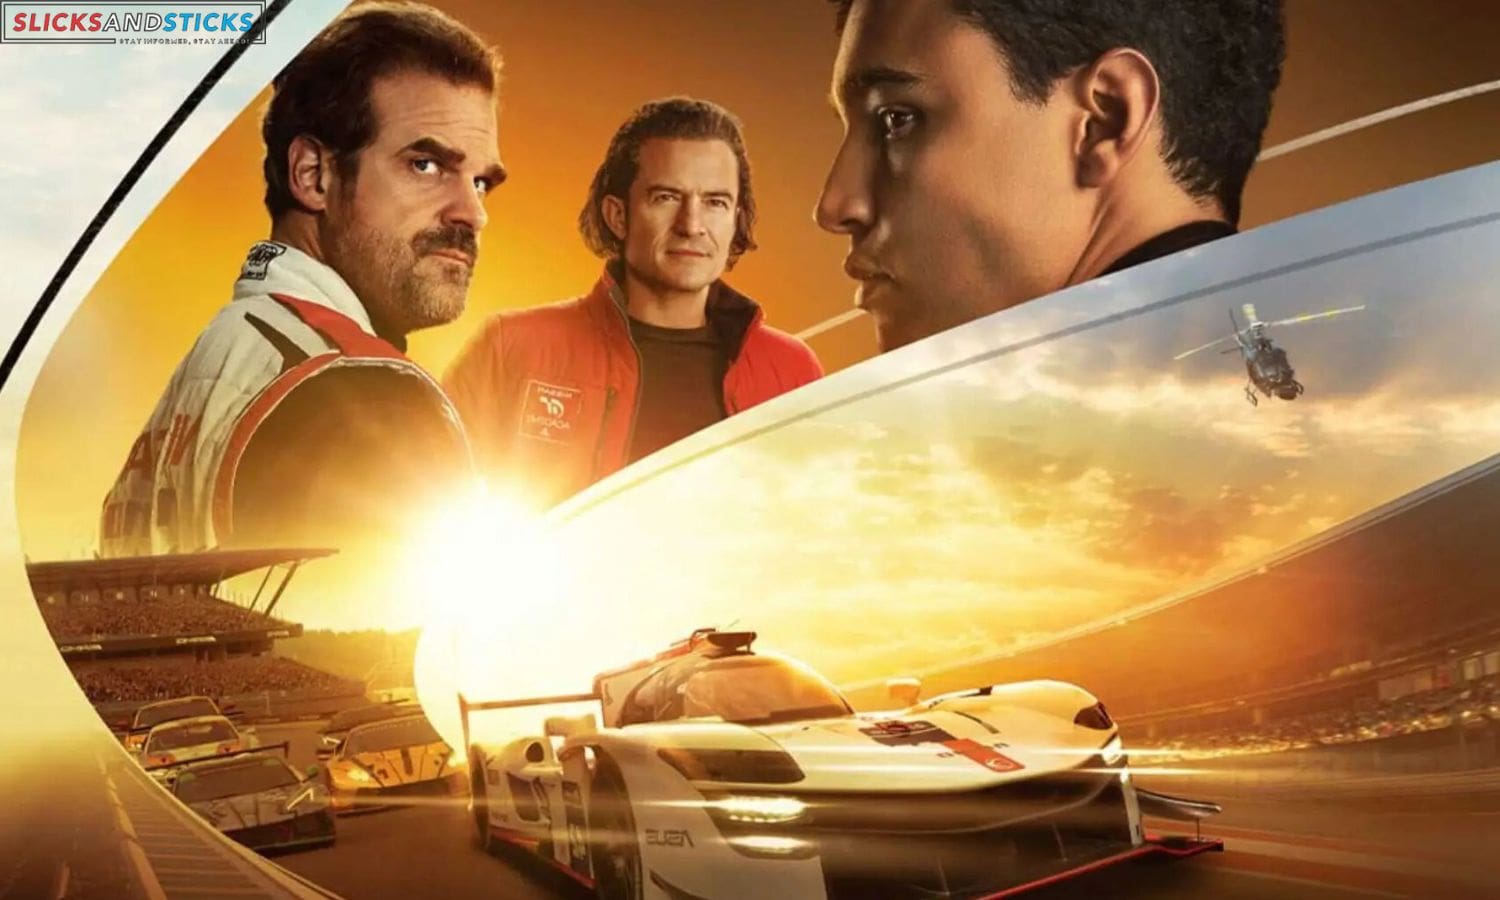 gran-turismo-a-true-story-from-gamer-to-racecar-driver-in-cinemas-thursday